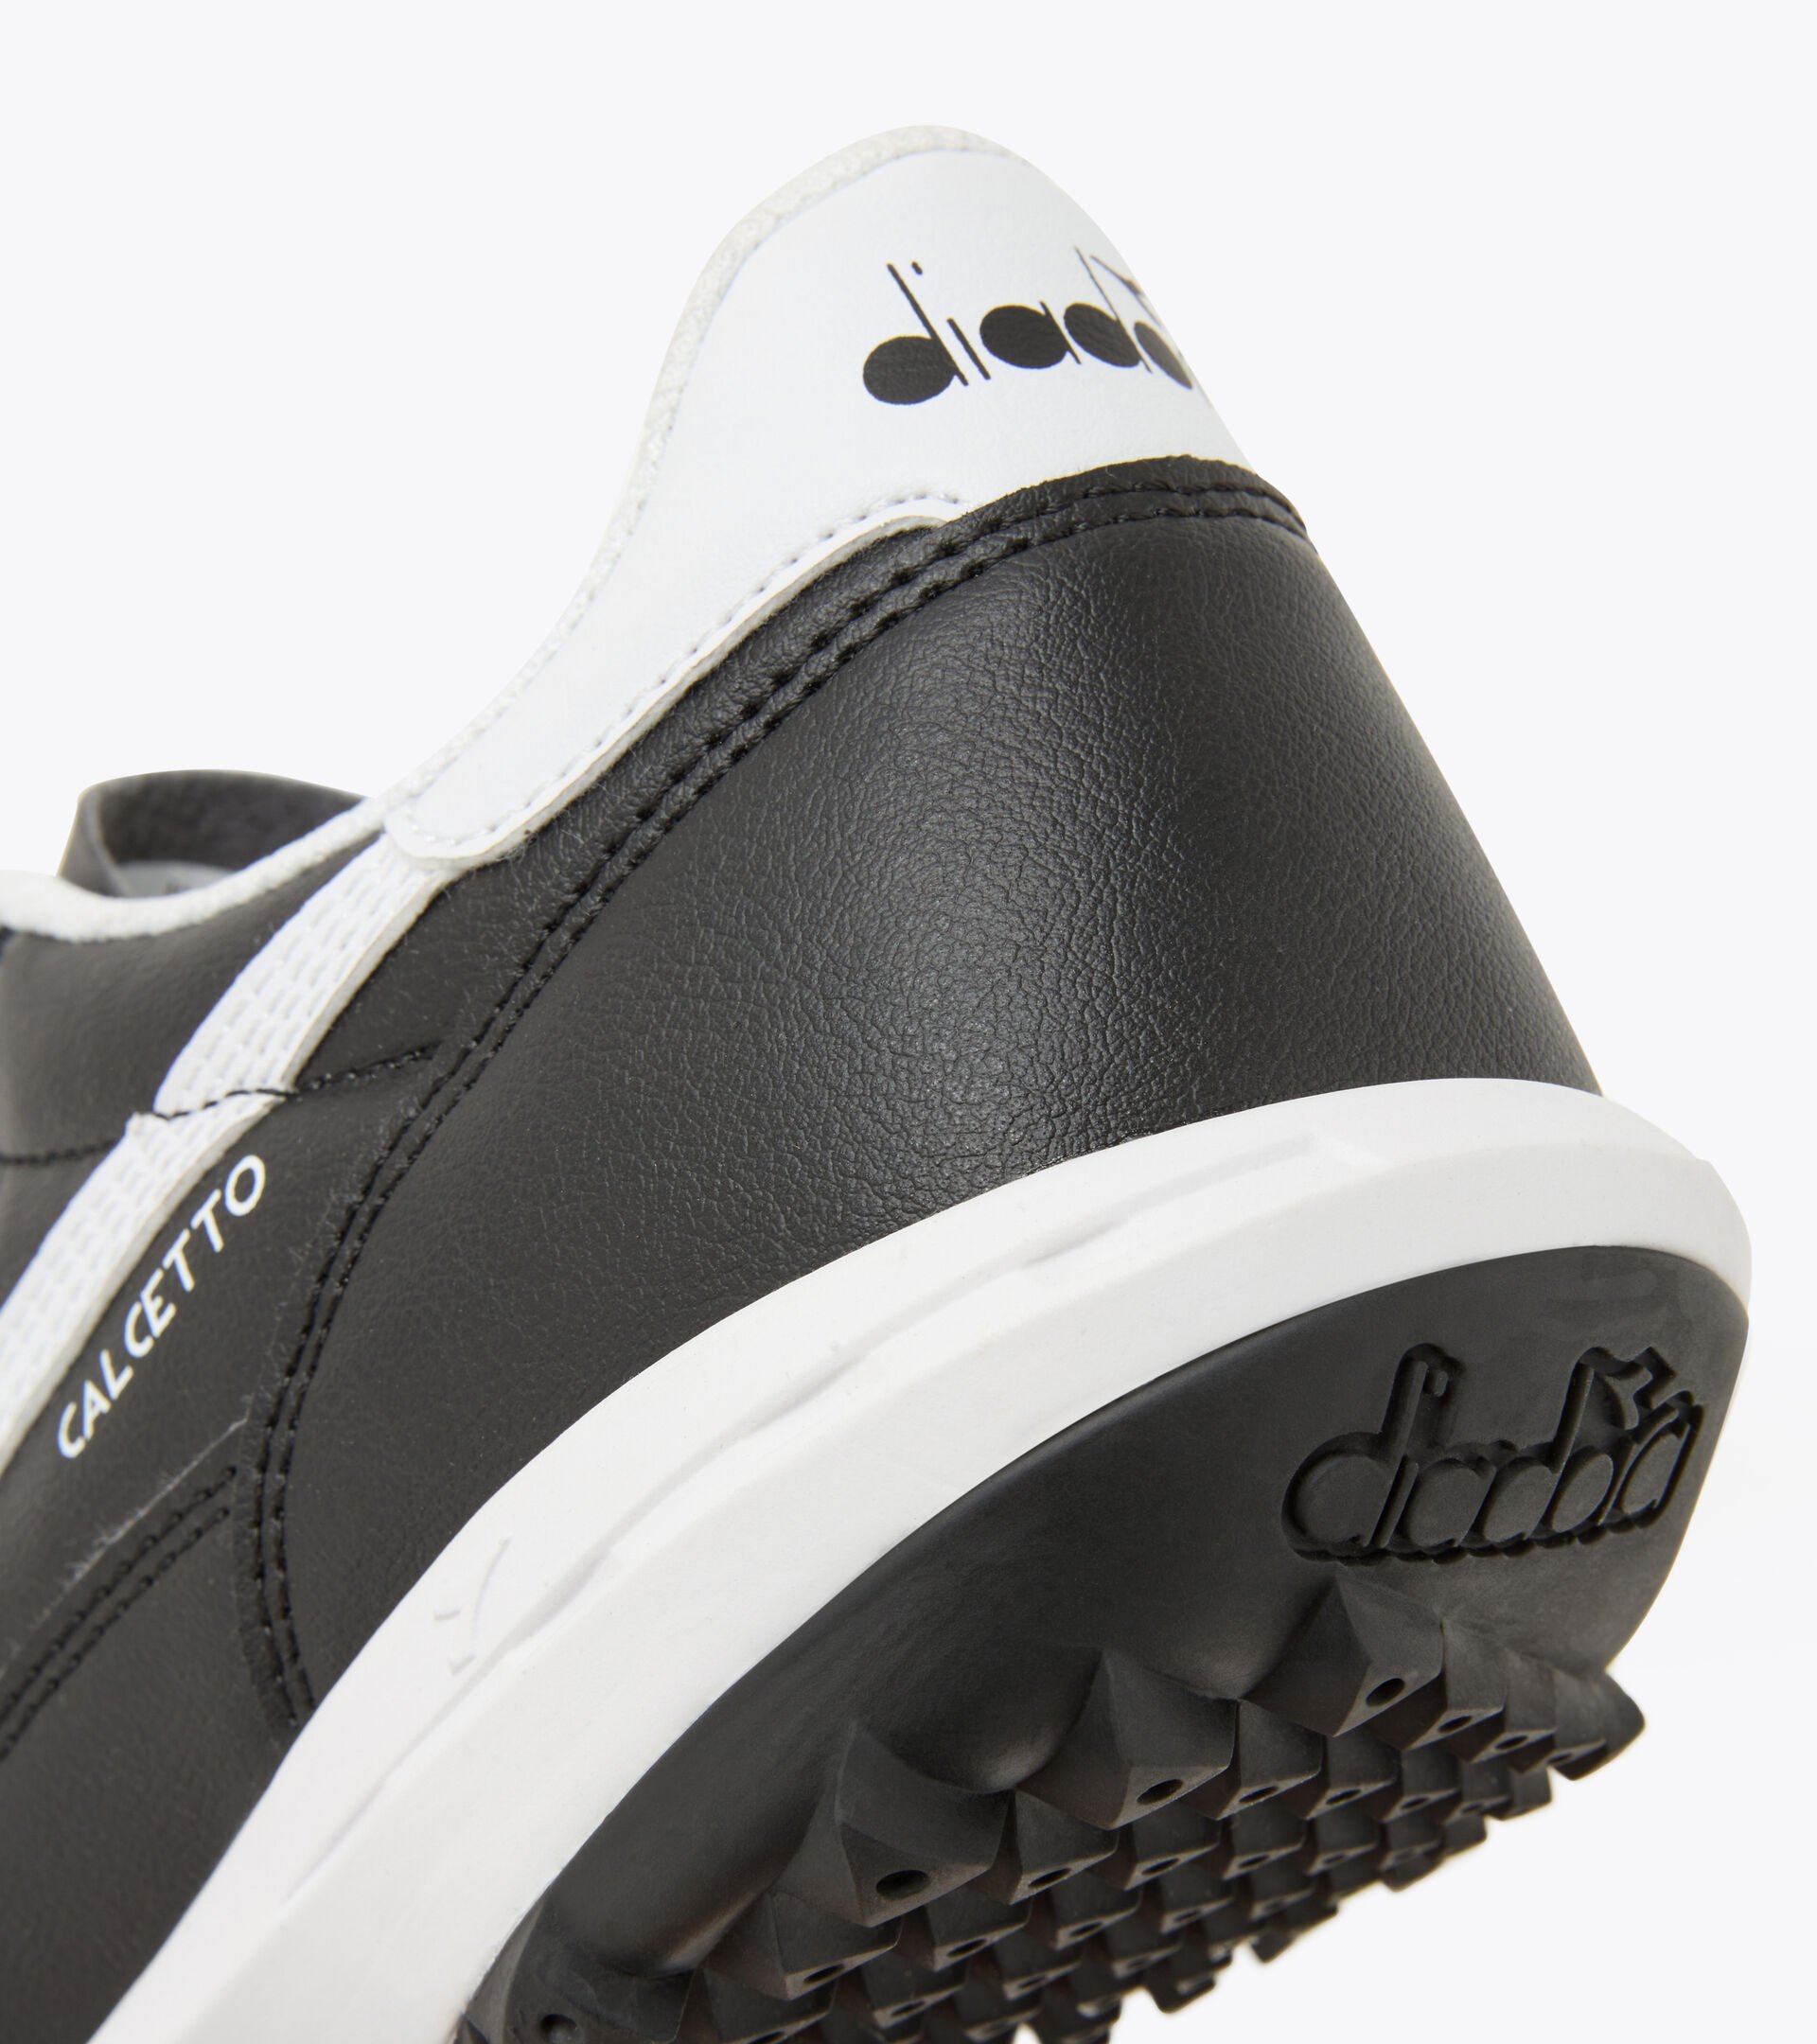 Futsal boot - Specific outsole for synthetic/hard grounds CALCETTO II LT TF BLACK /WHITE - Diadora